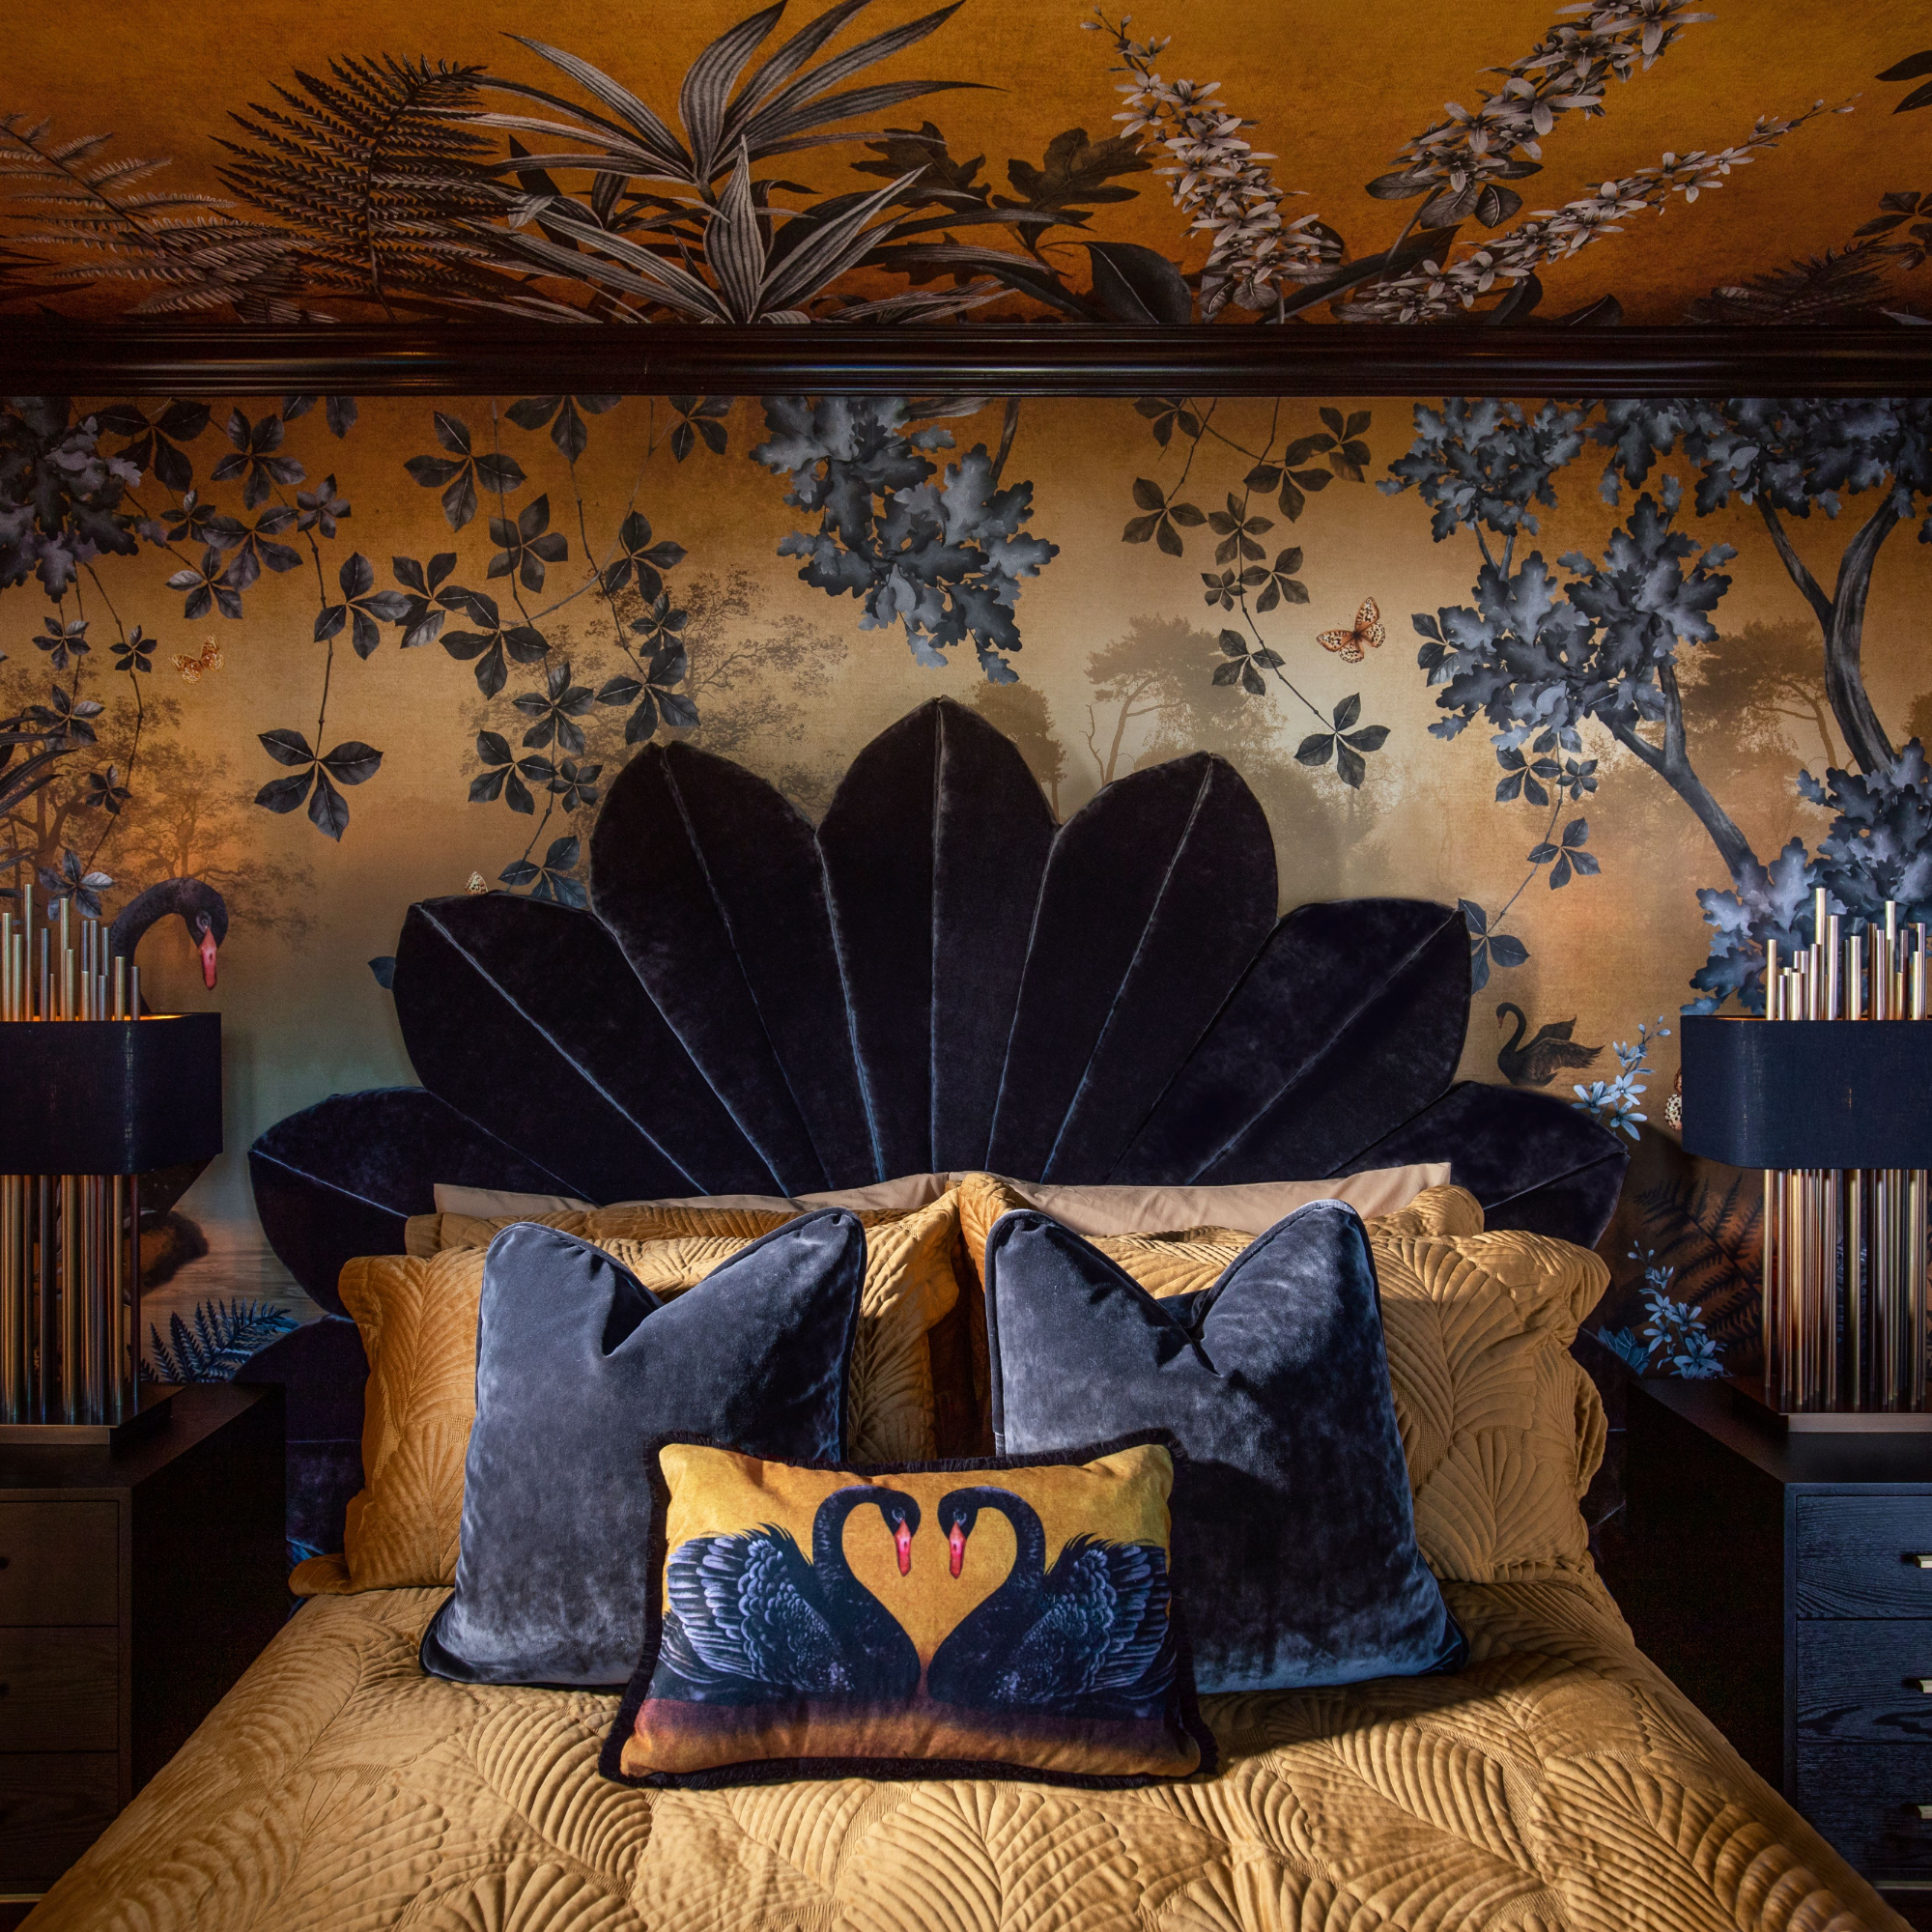 Gold and dark blue wall and ceiling mural in bedroom, with matching headboard and bedding design